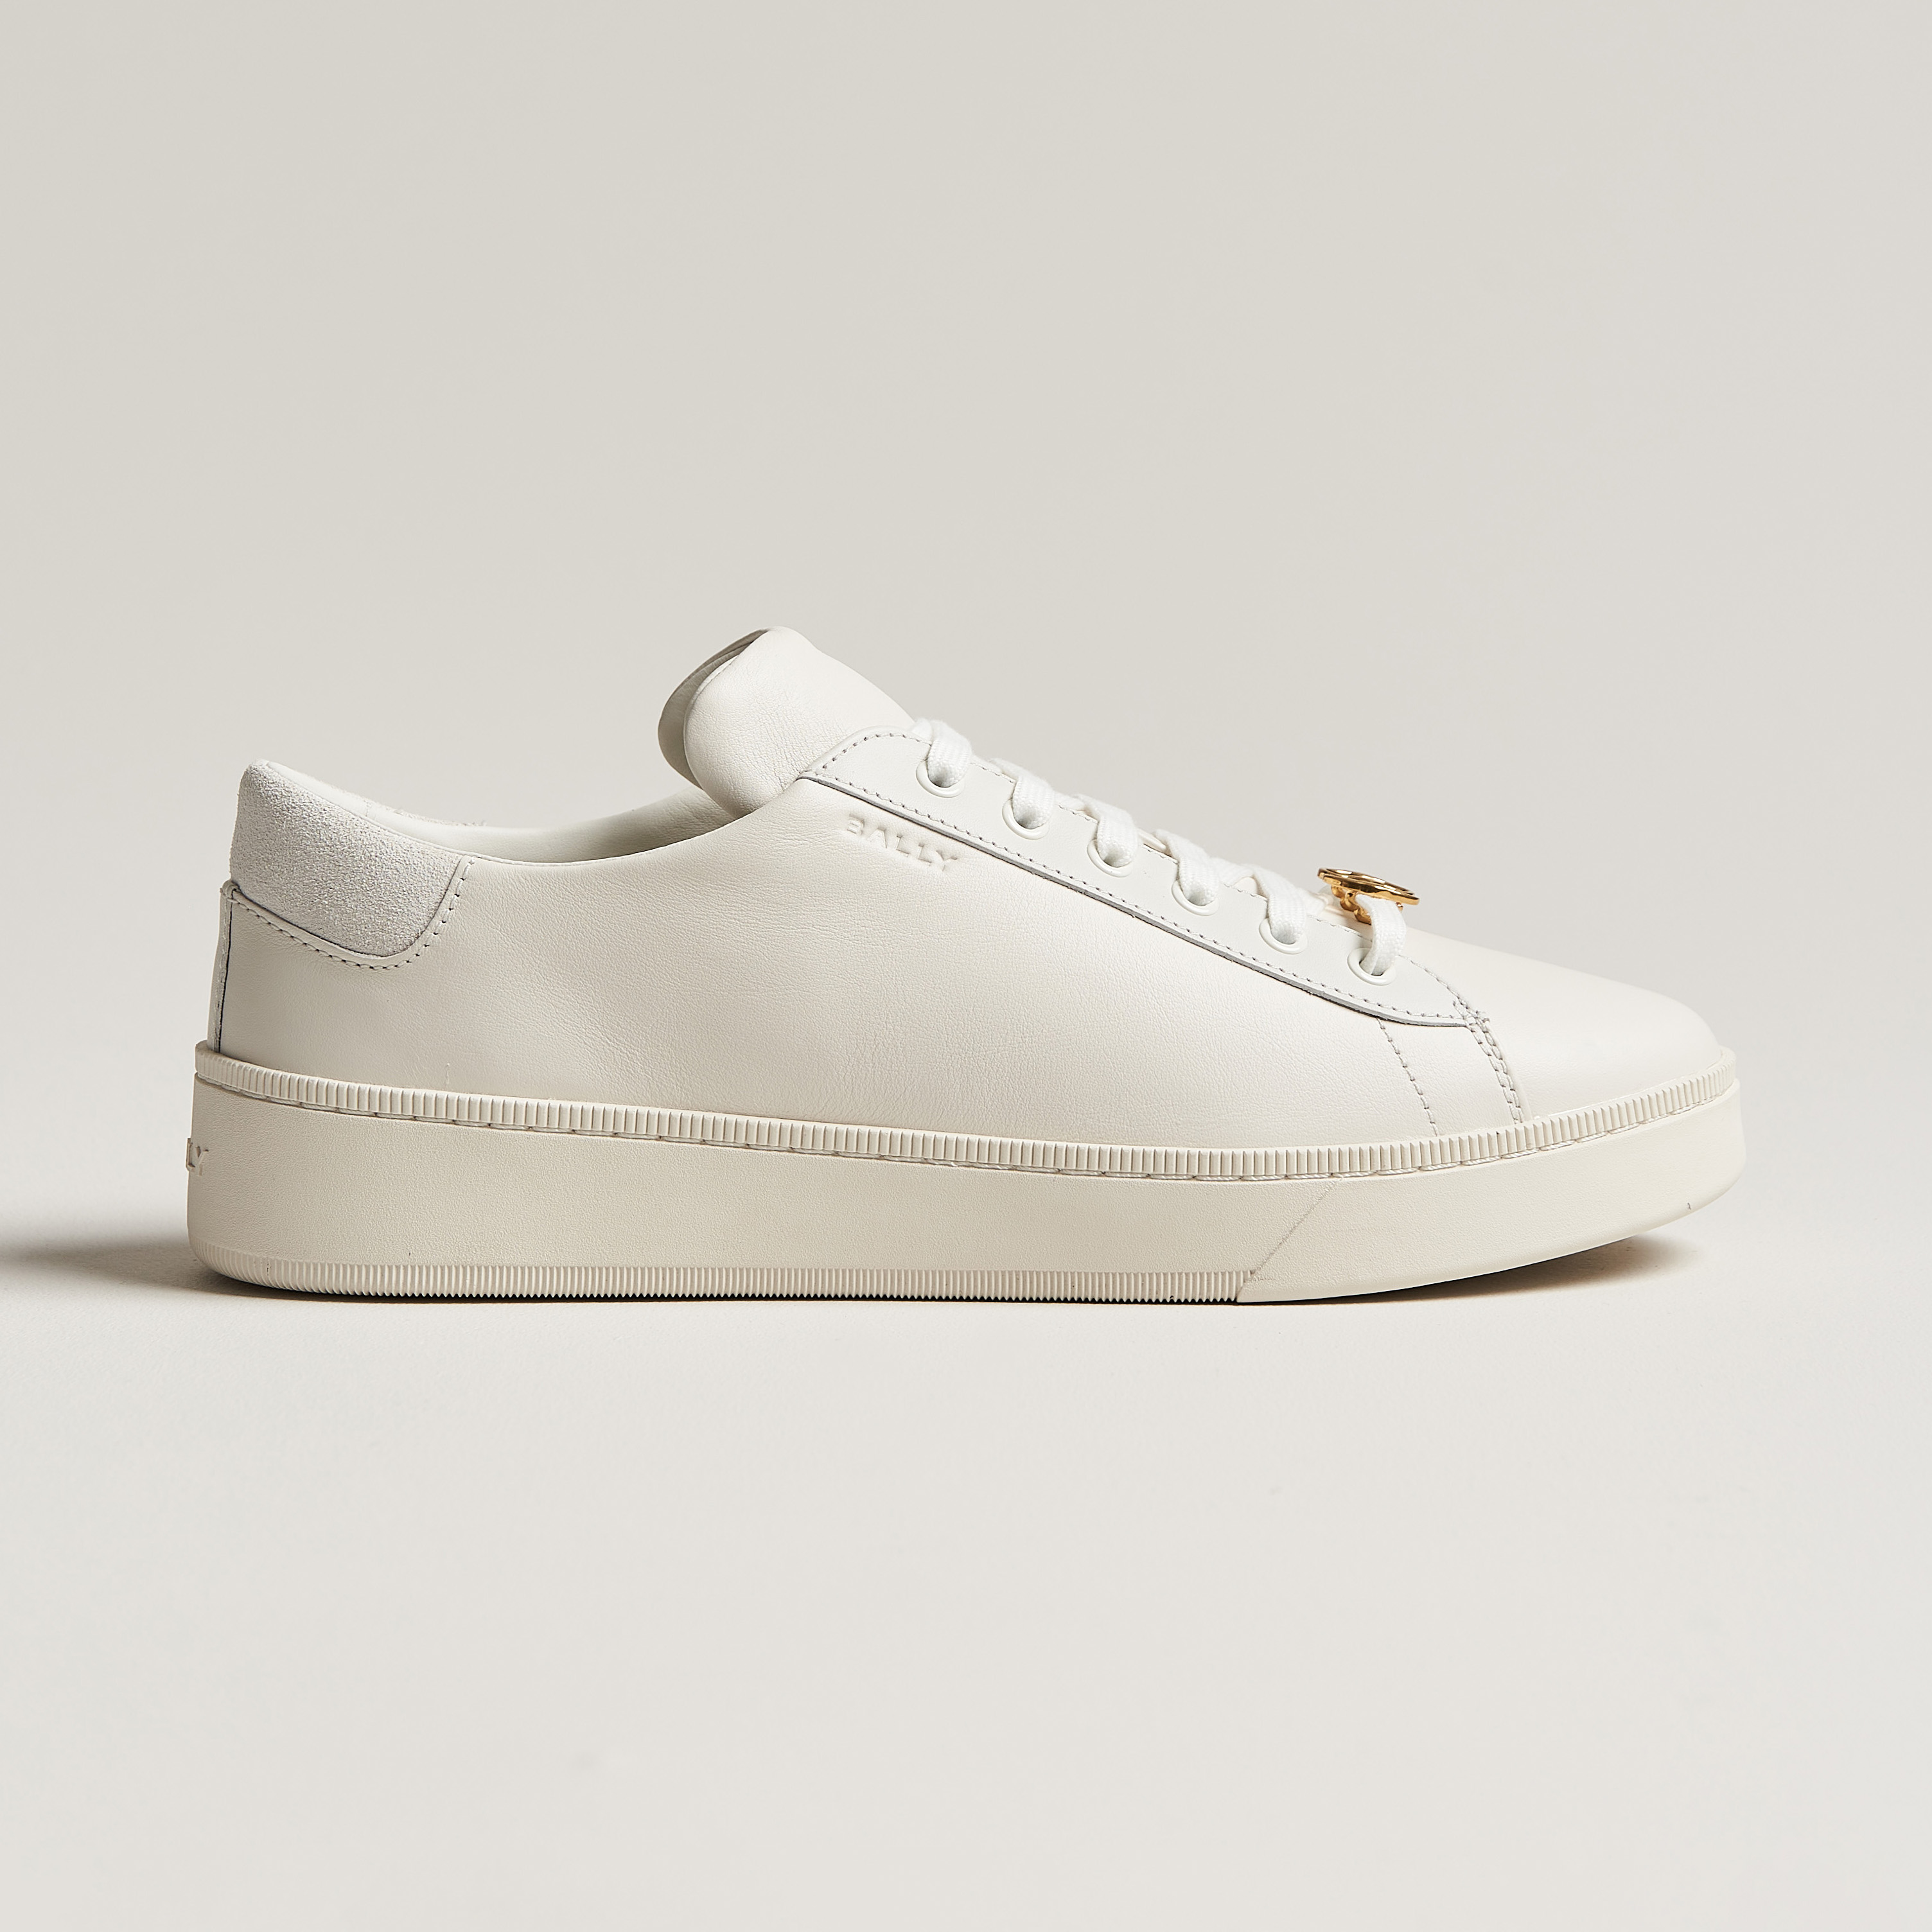 Bally Ryver Leather Sneaker White at CareOfCarl.com